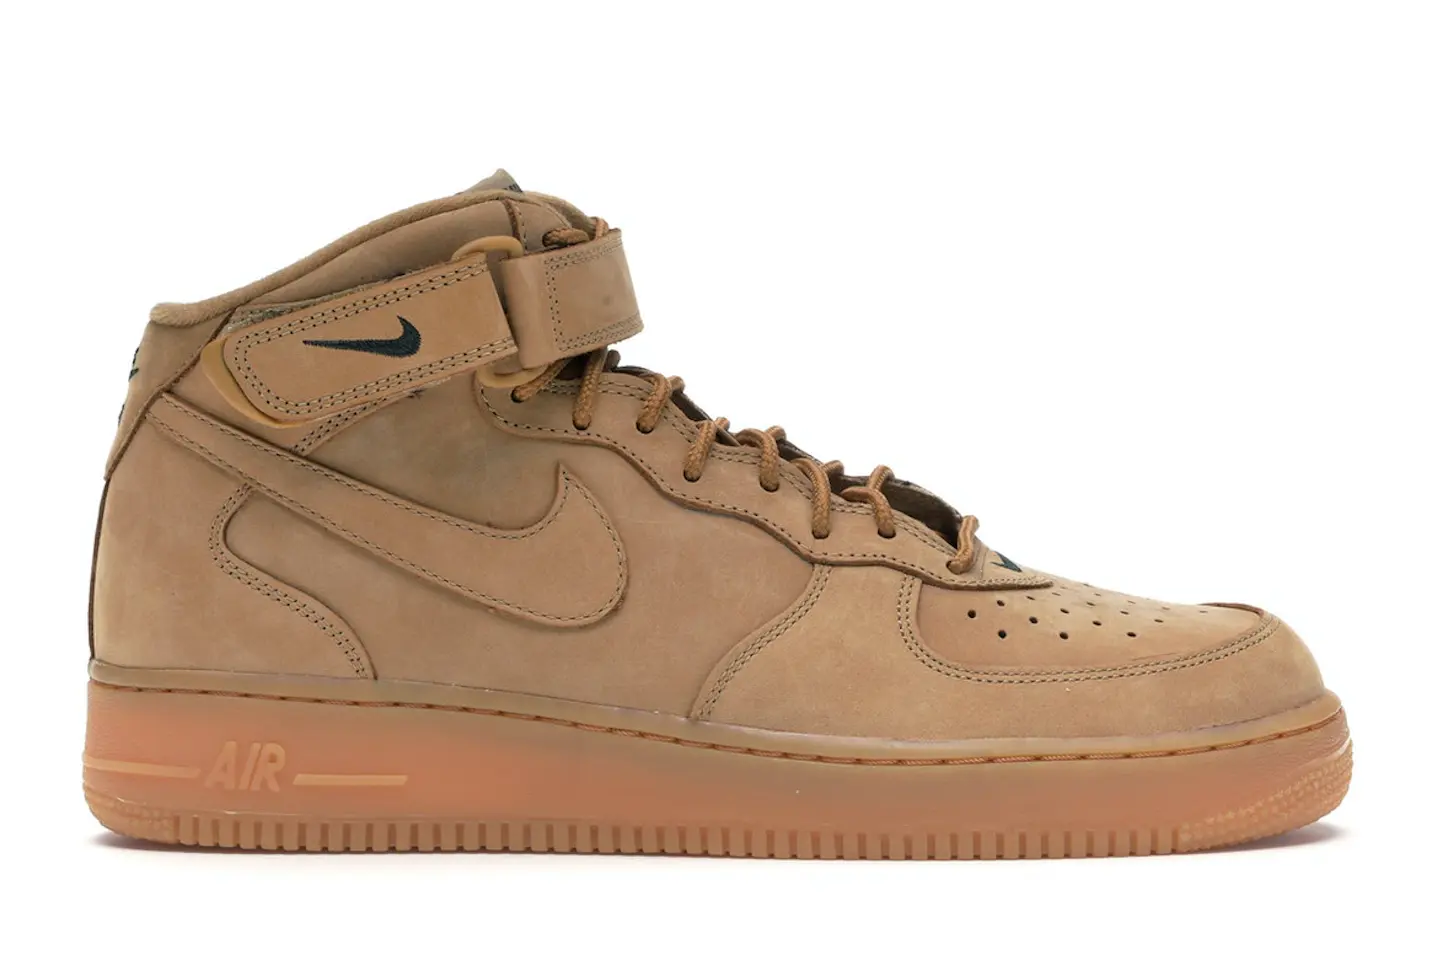 Nike Air Force 1 Mid Flax (2016) Men's - 715889-200 - US